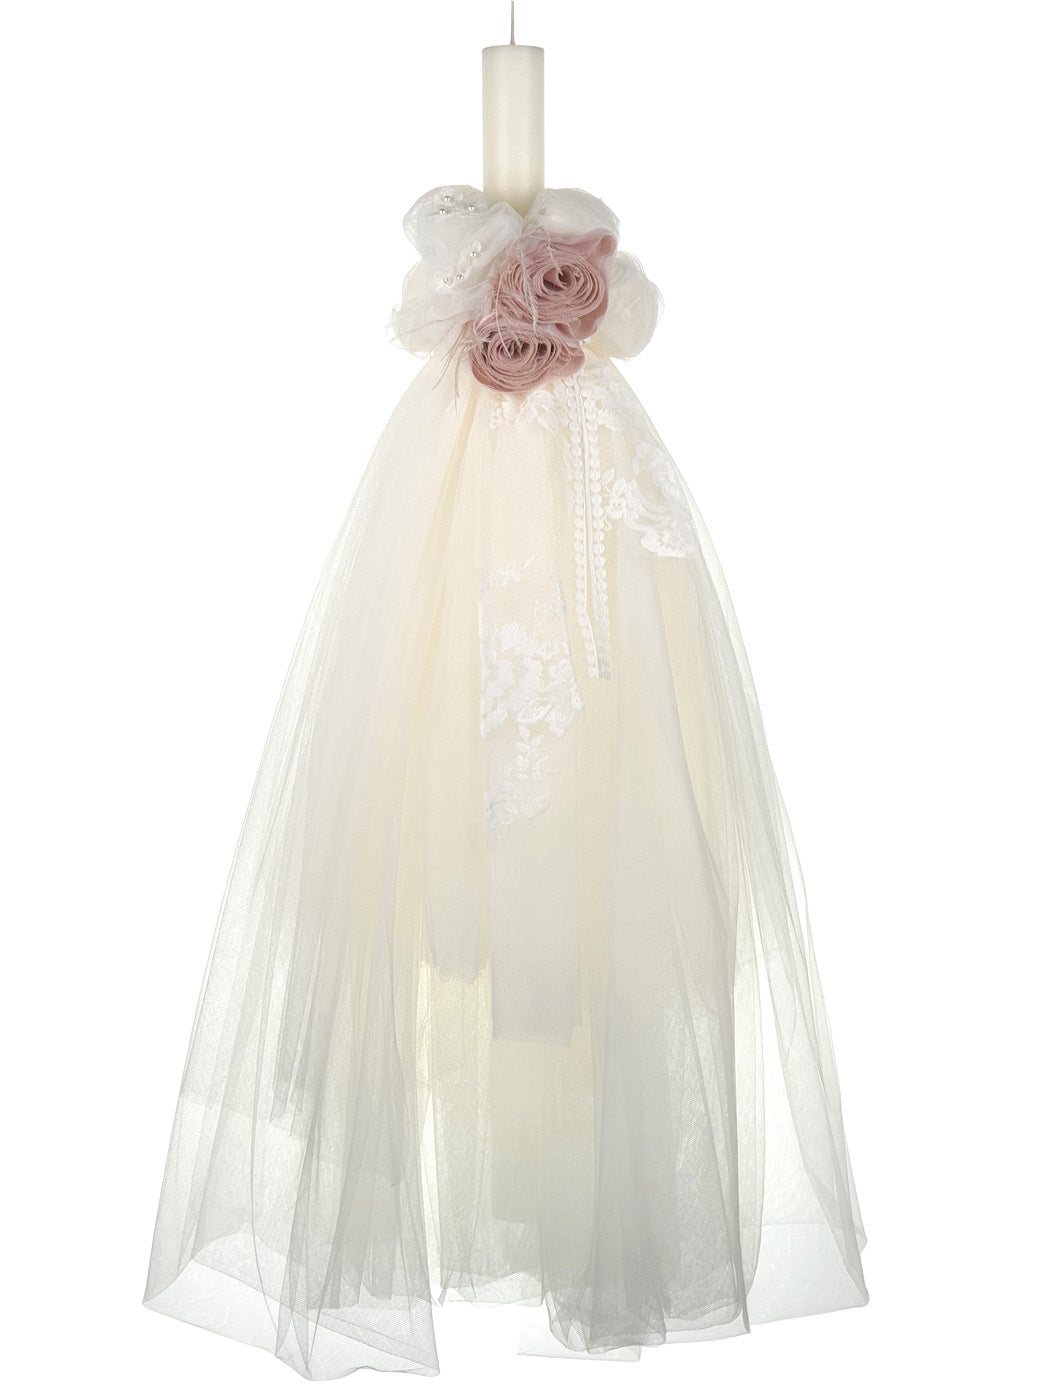 Baptism candle with Lace & Flowers - IOKASTE